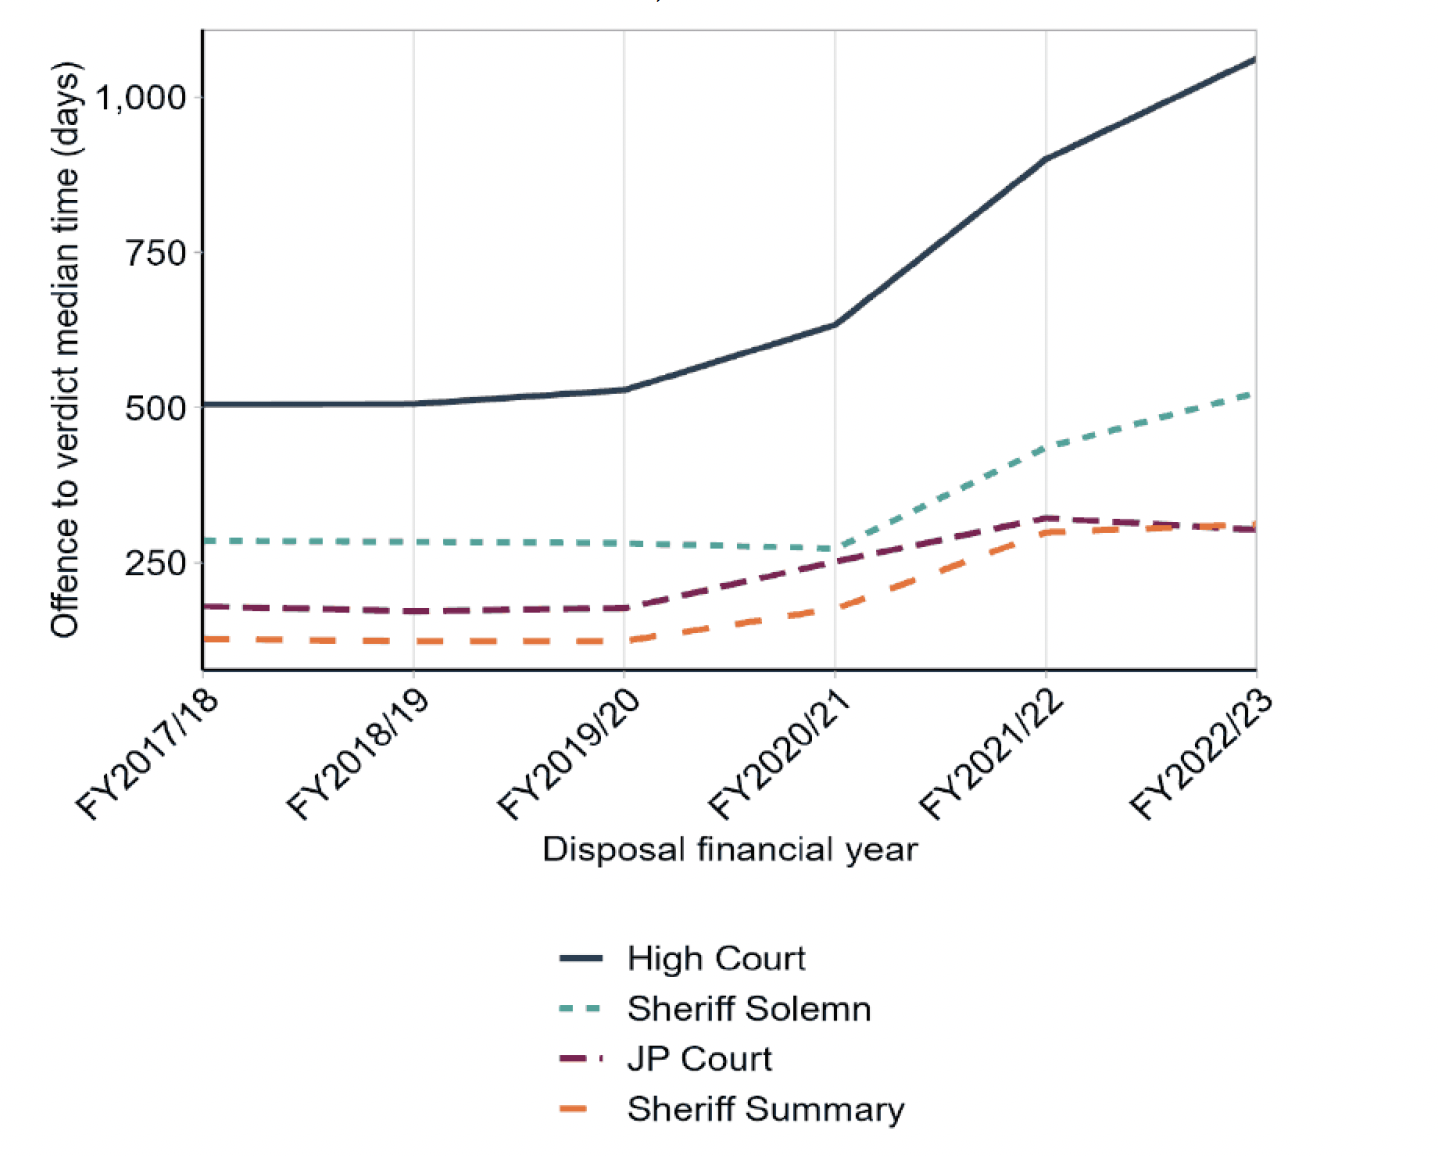 A graph showing the median time from offence to verdict in the high court, sheriff solemn, JP Court and Sheriff Summary, from financial year 2017/18 to financial year 2022/23. 